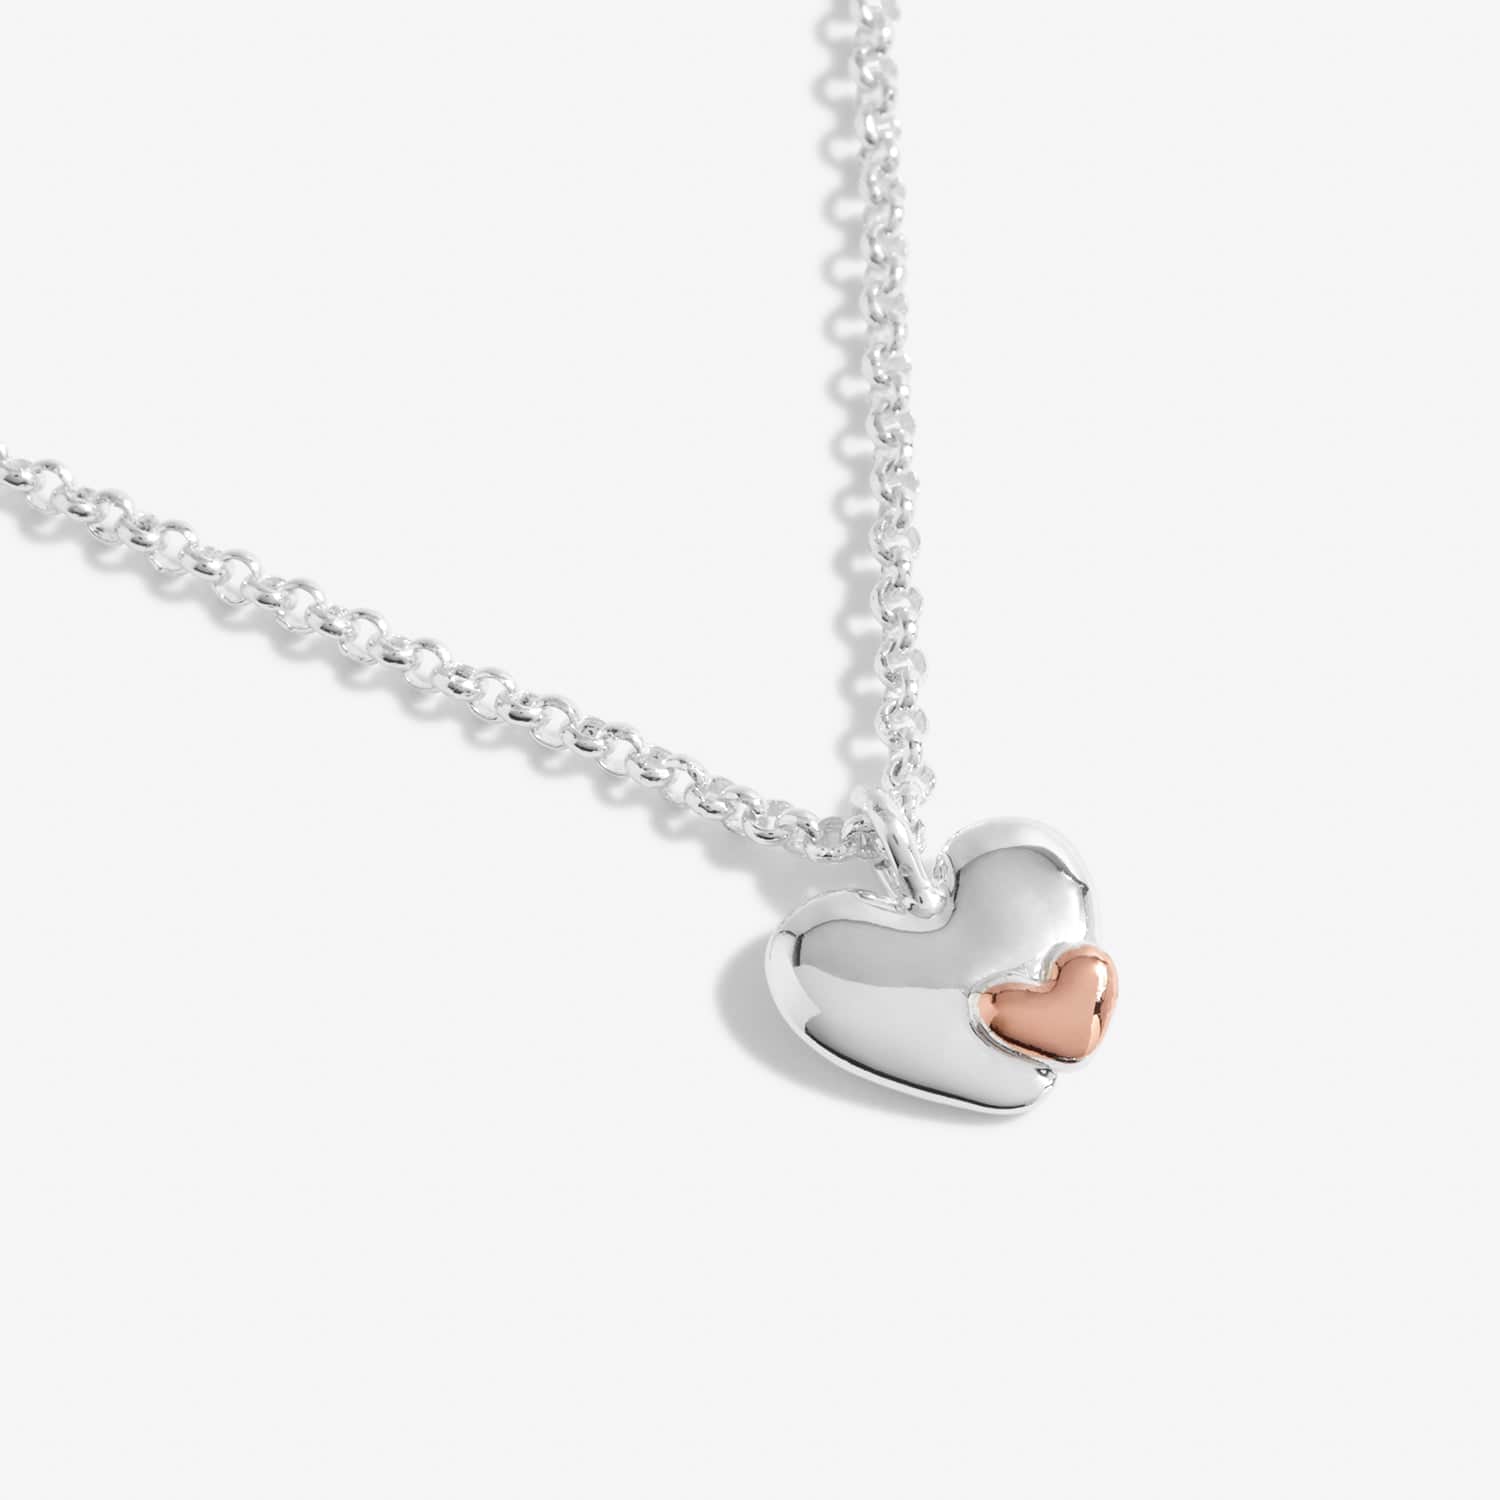 Joma Jewellery Necklace Joma Jewellery Necklace - A Little Mummy To Be